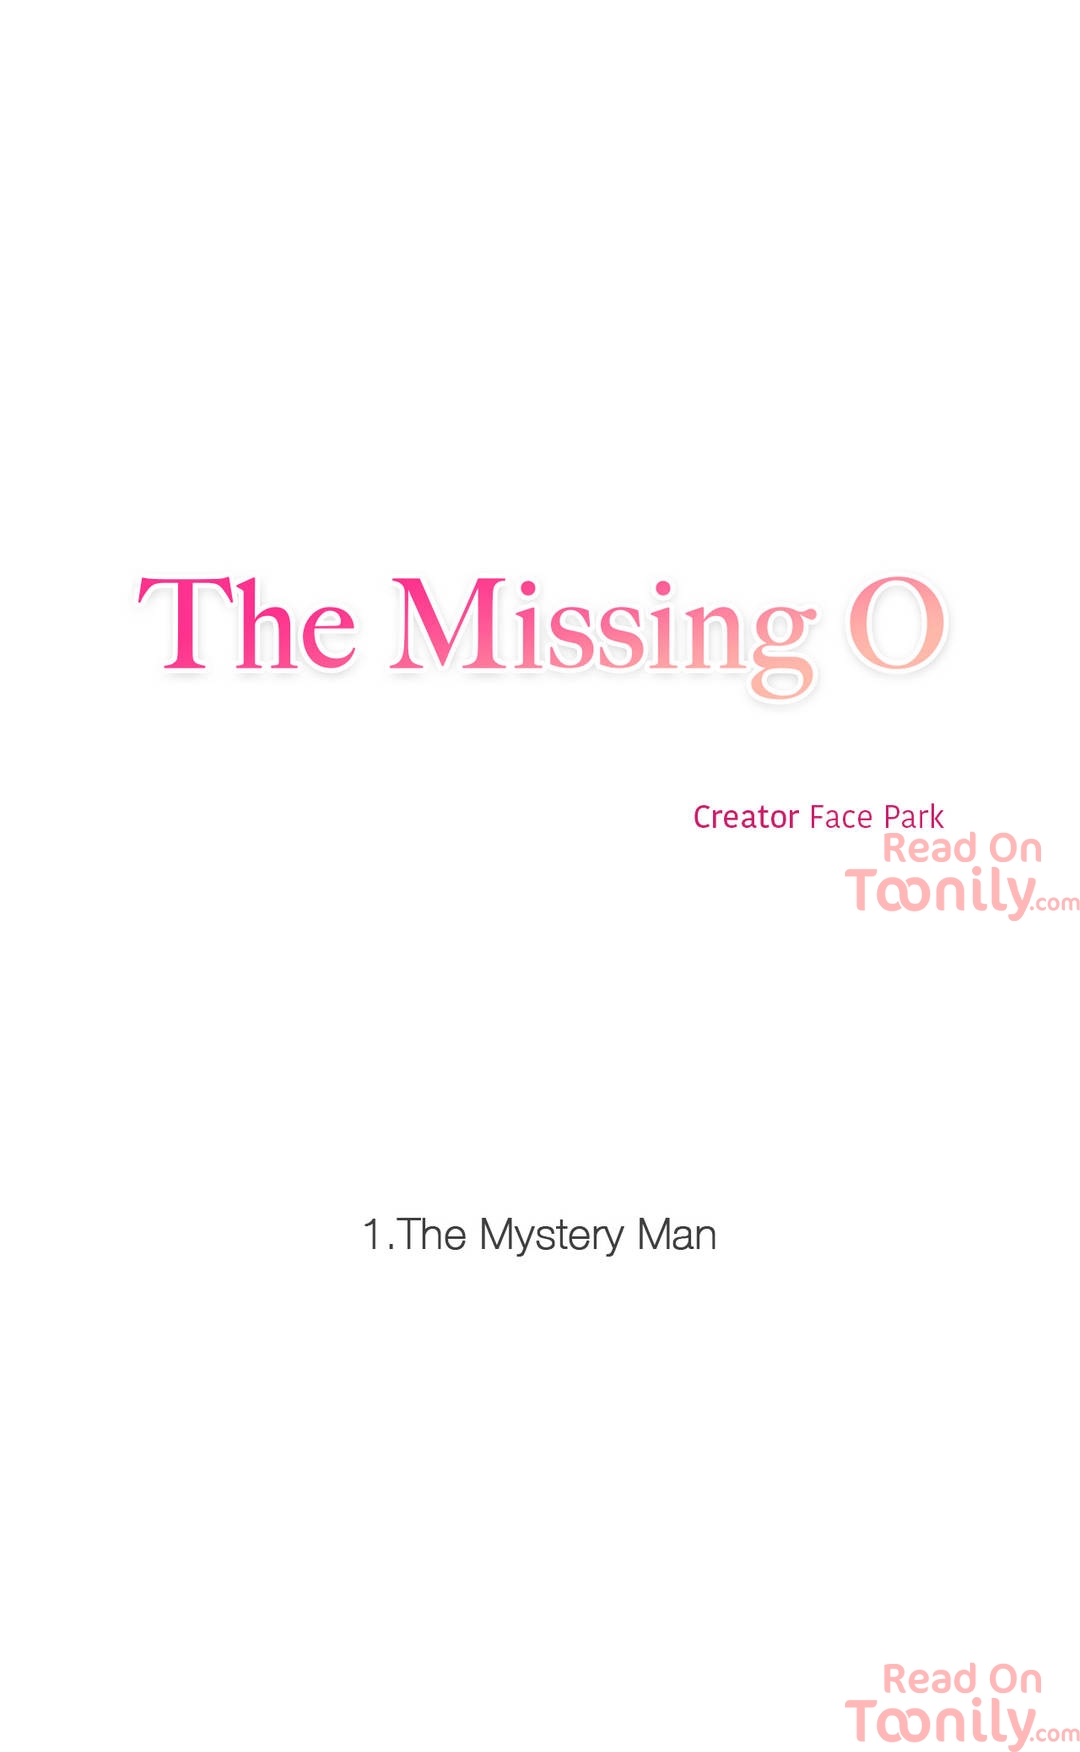 The Missing O image